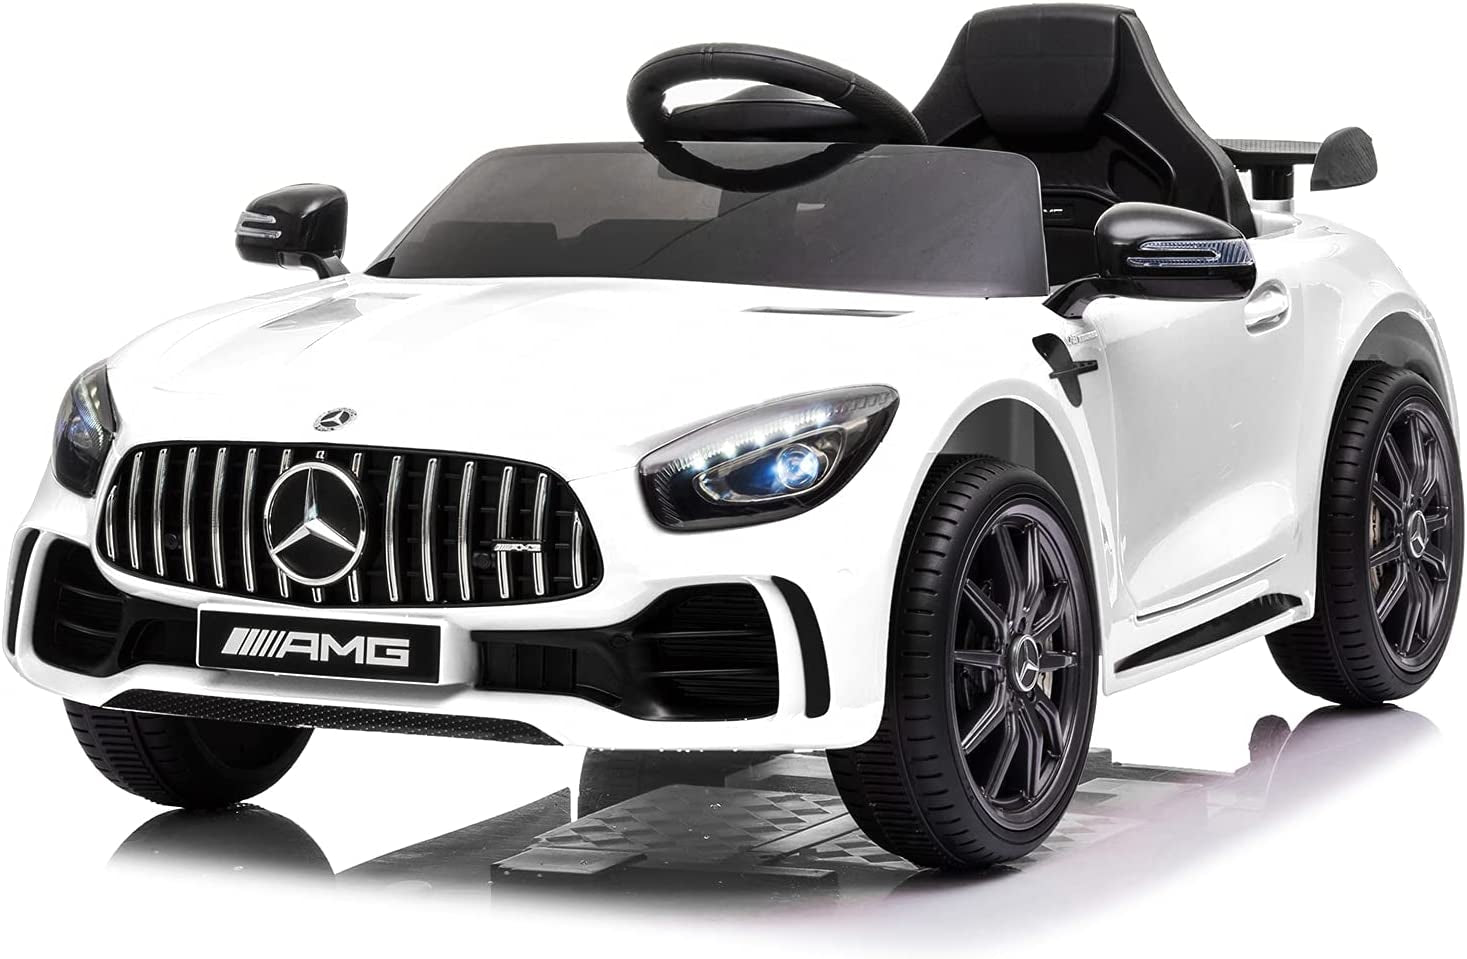 Electric Ride on Car with Remote Control Battery Powered Cars for Kids to Drive Power Wheels for Boys 12V/Led Lights/Aux Port (White)